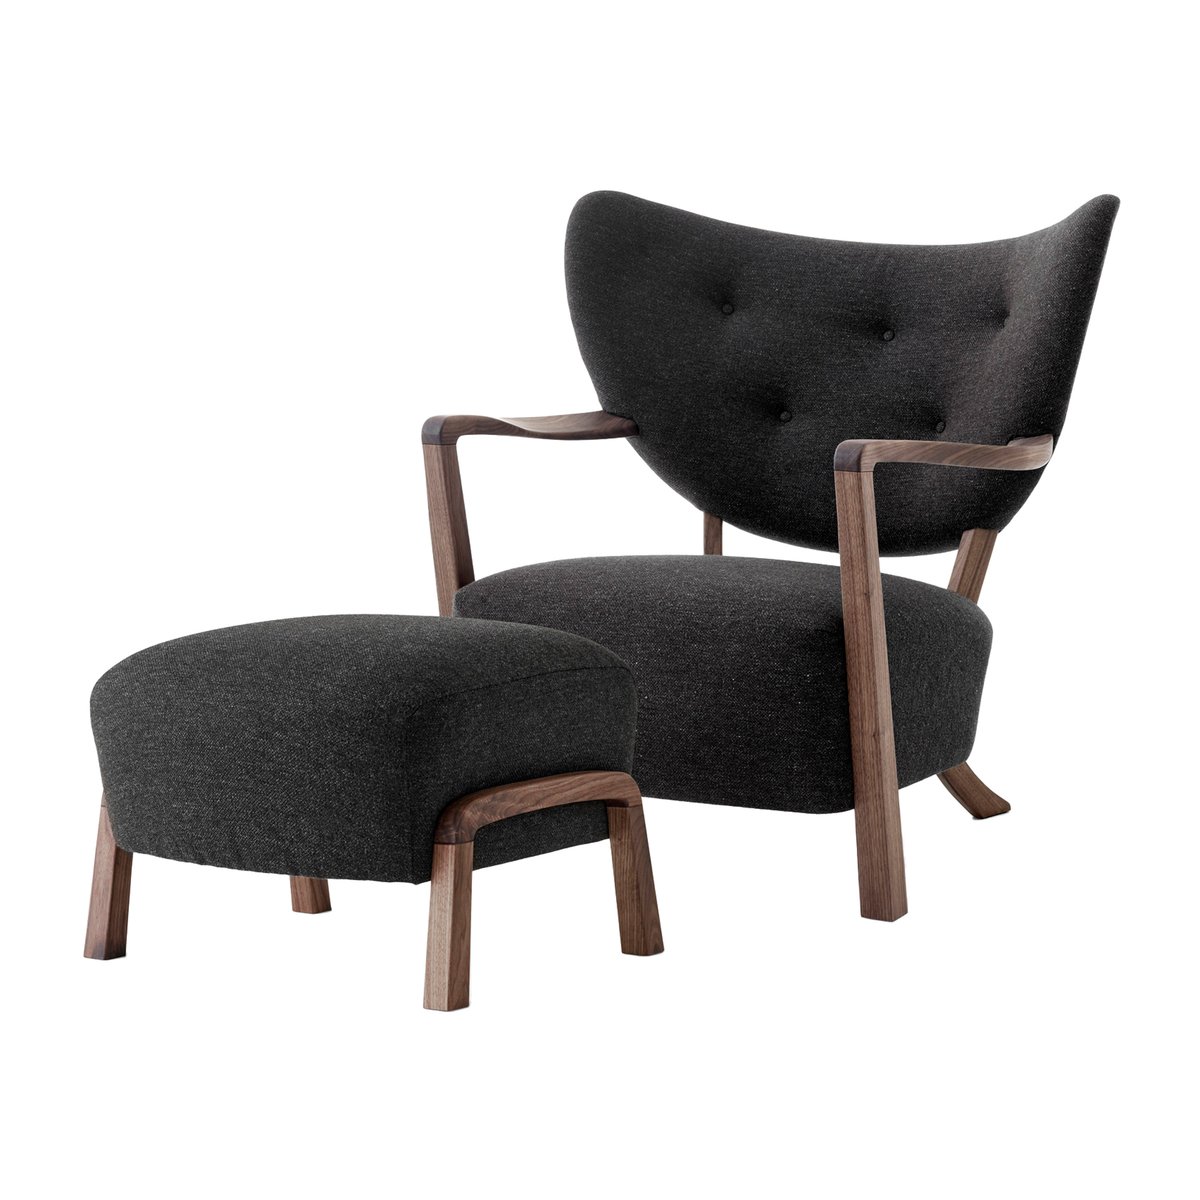 &Tradition Wulff Lounge Chair ATD2 fauteuil incl. poef ATD3 Geolied walnoot-Hallingdal